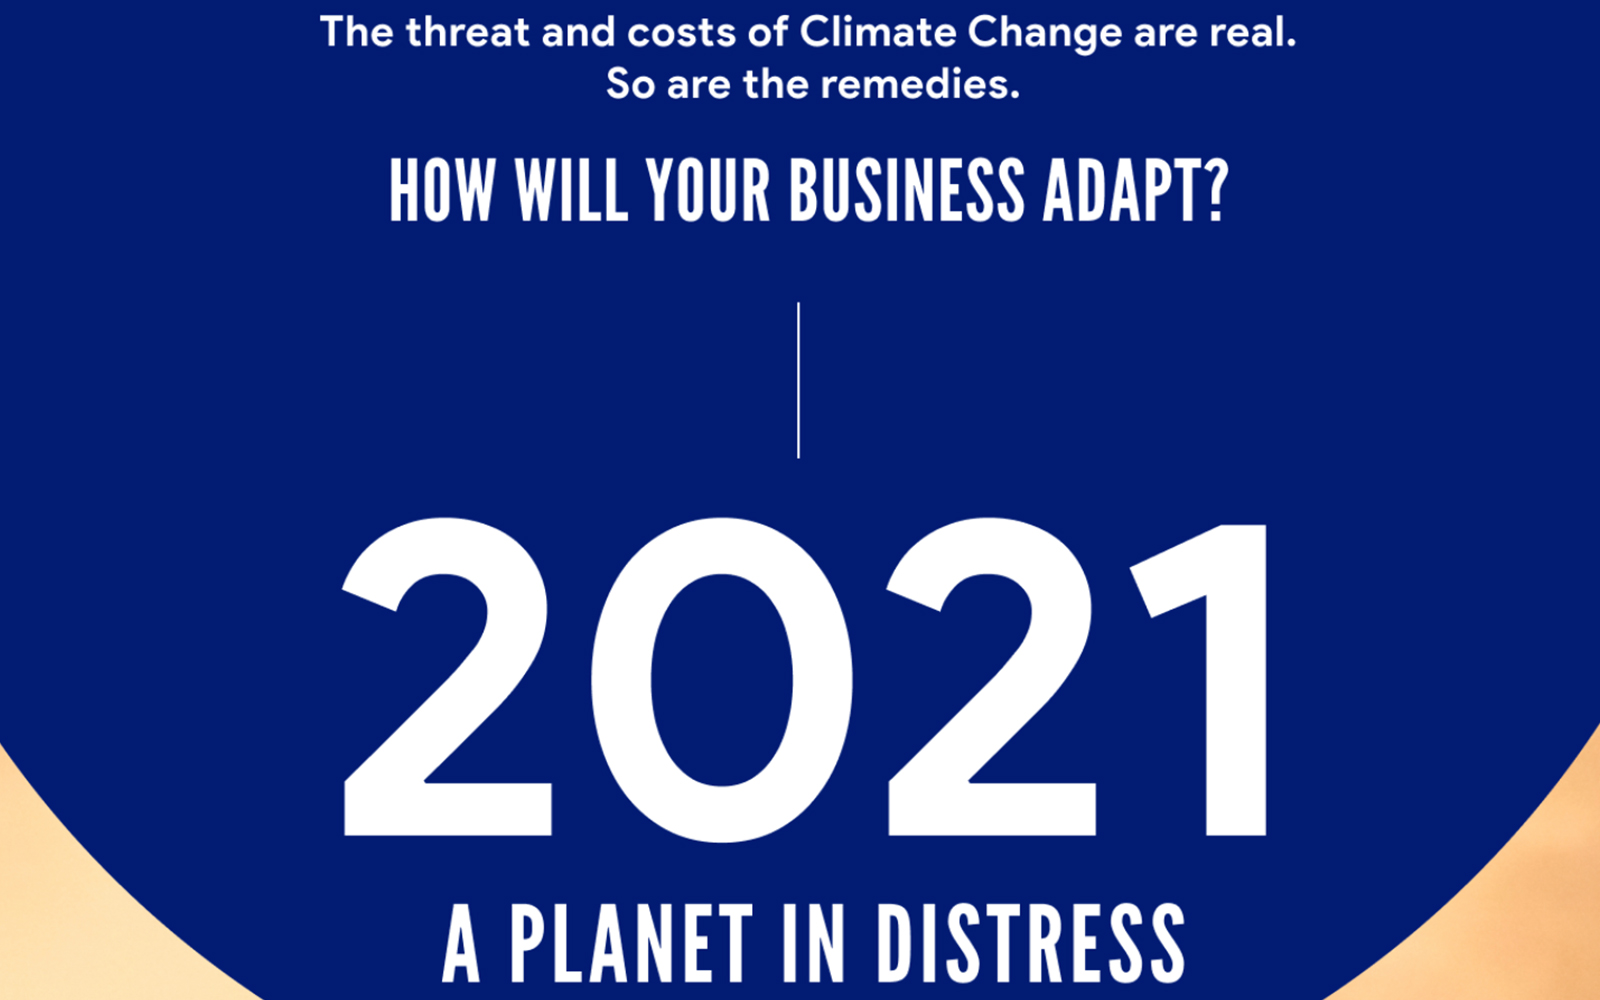 The Financial Costs of Climate Change